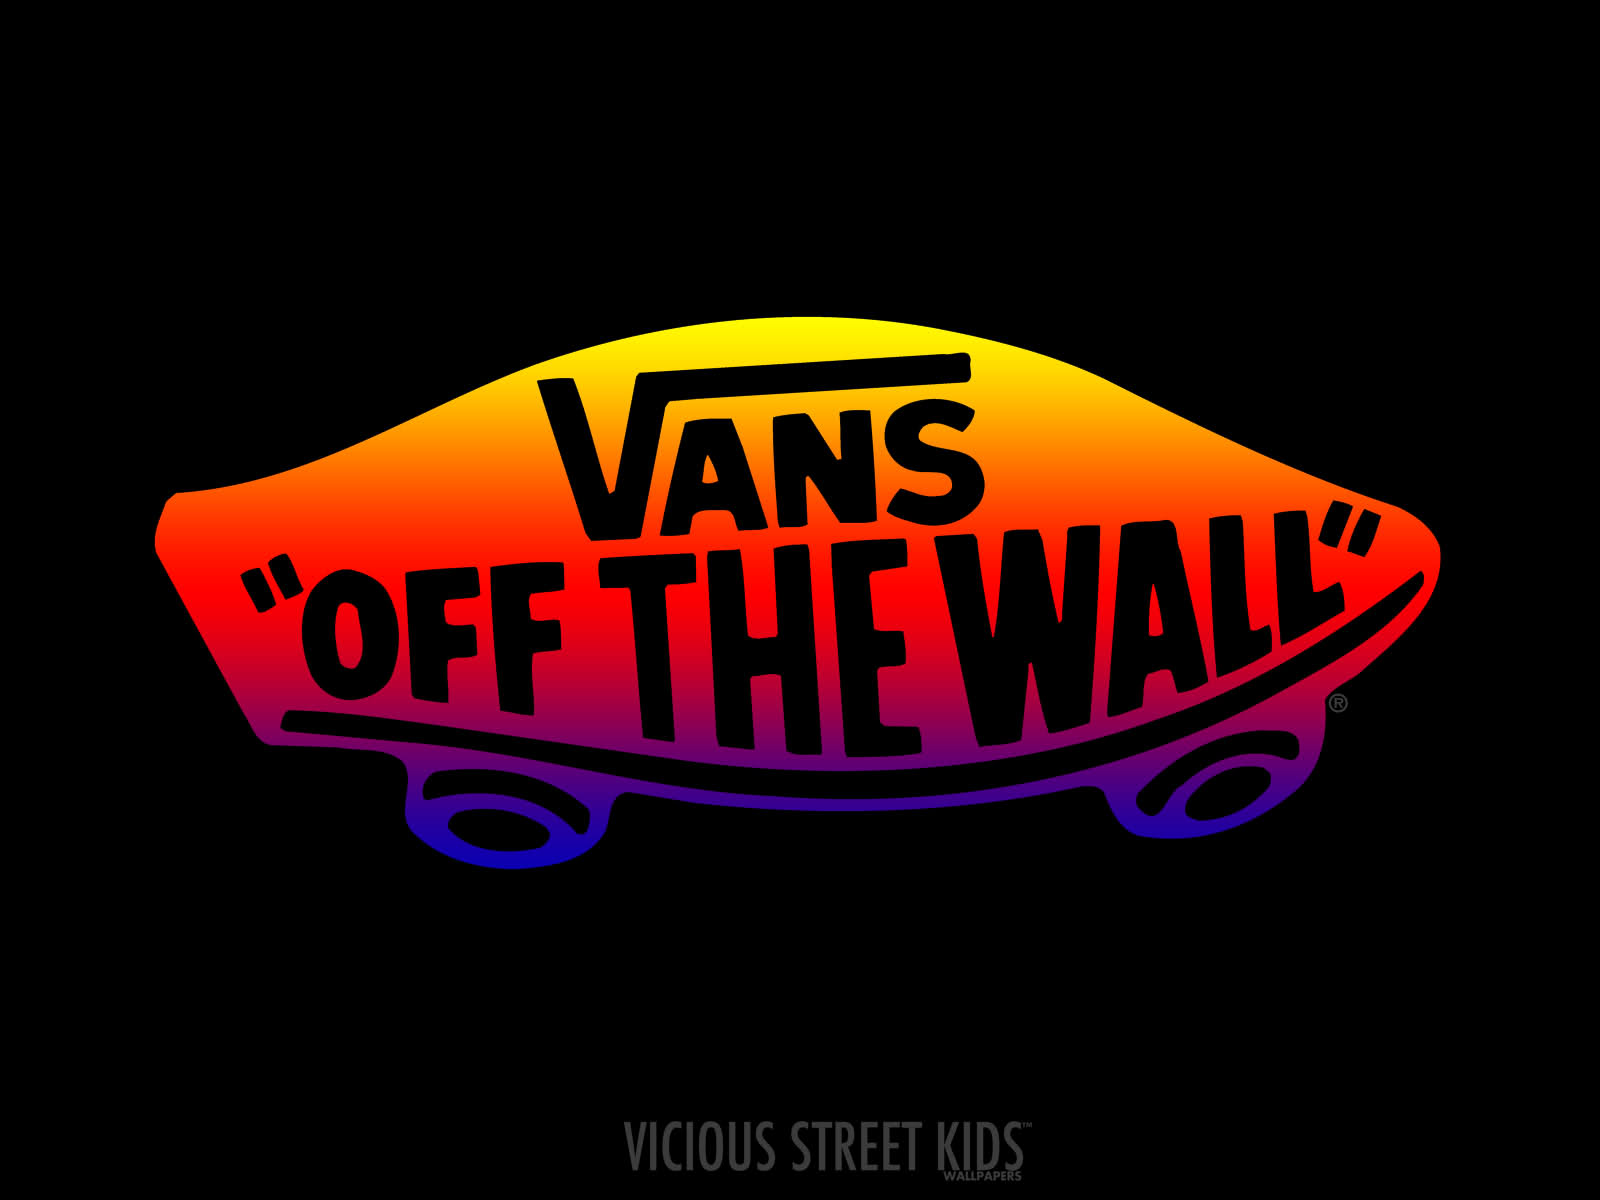 vans all the wall